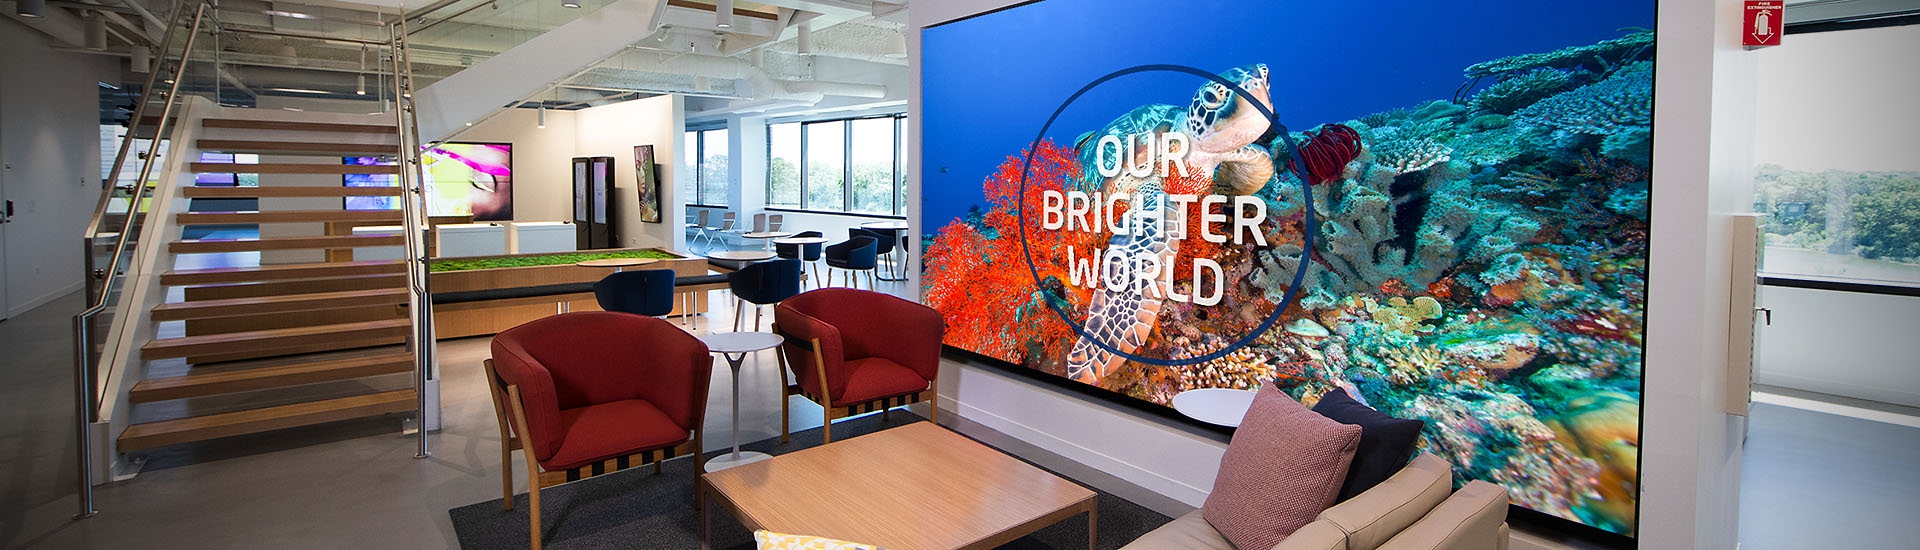 CUSTOM LED MOUNTING SOLUTION | North American Headquarters for NEC Display Solutions, Downers Grove, IL